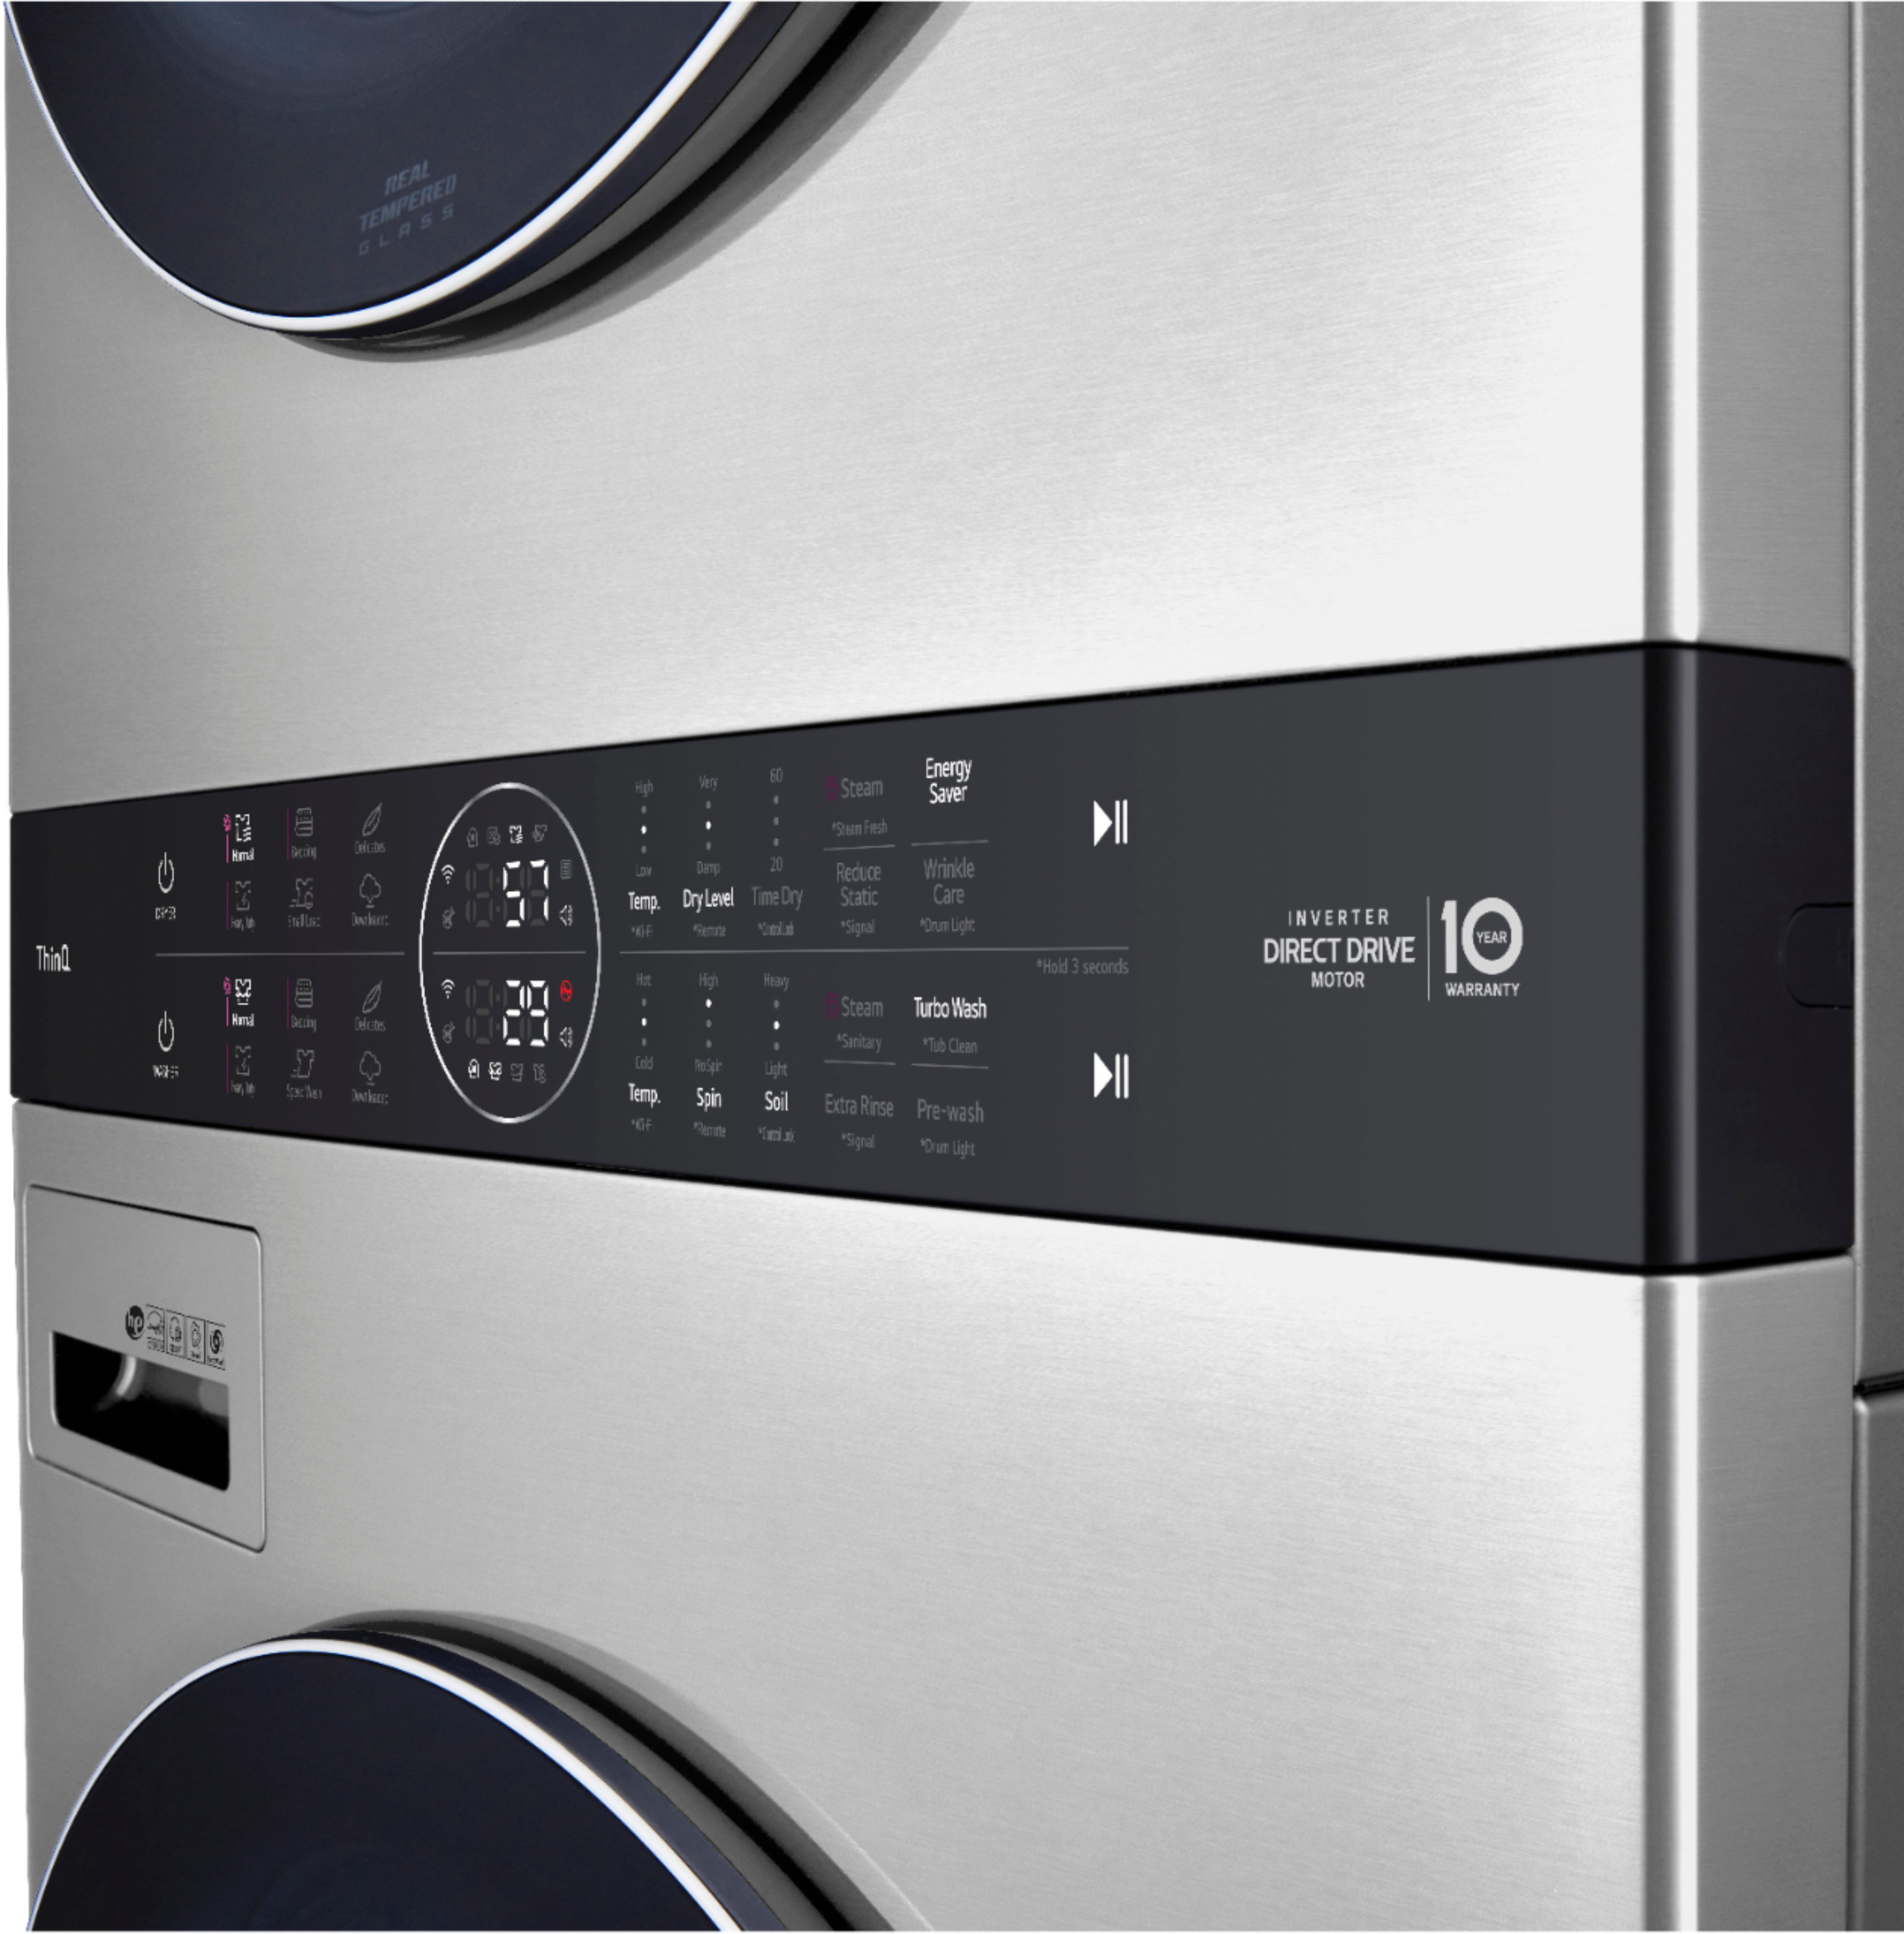 LG STUDIO Gas Steam WashTower - Dryer WSGX201HNA Steel Ft. and Front HE Intelligence Buy Load with Smart Built-In Cu. Ft. Washer and Noble 7.4 Cu. 5.0 Best